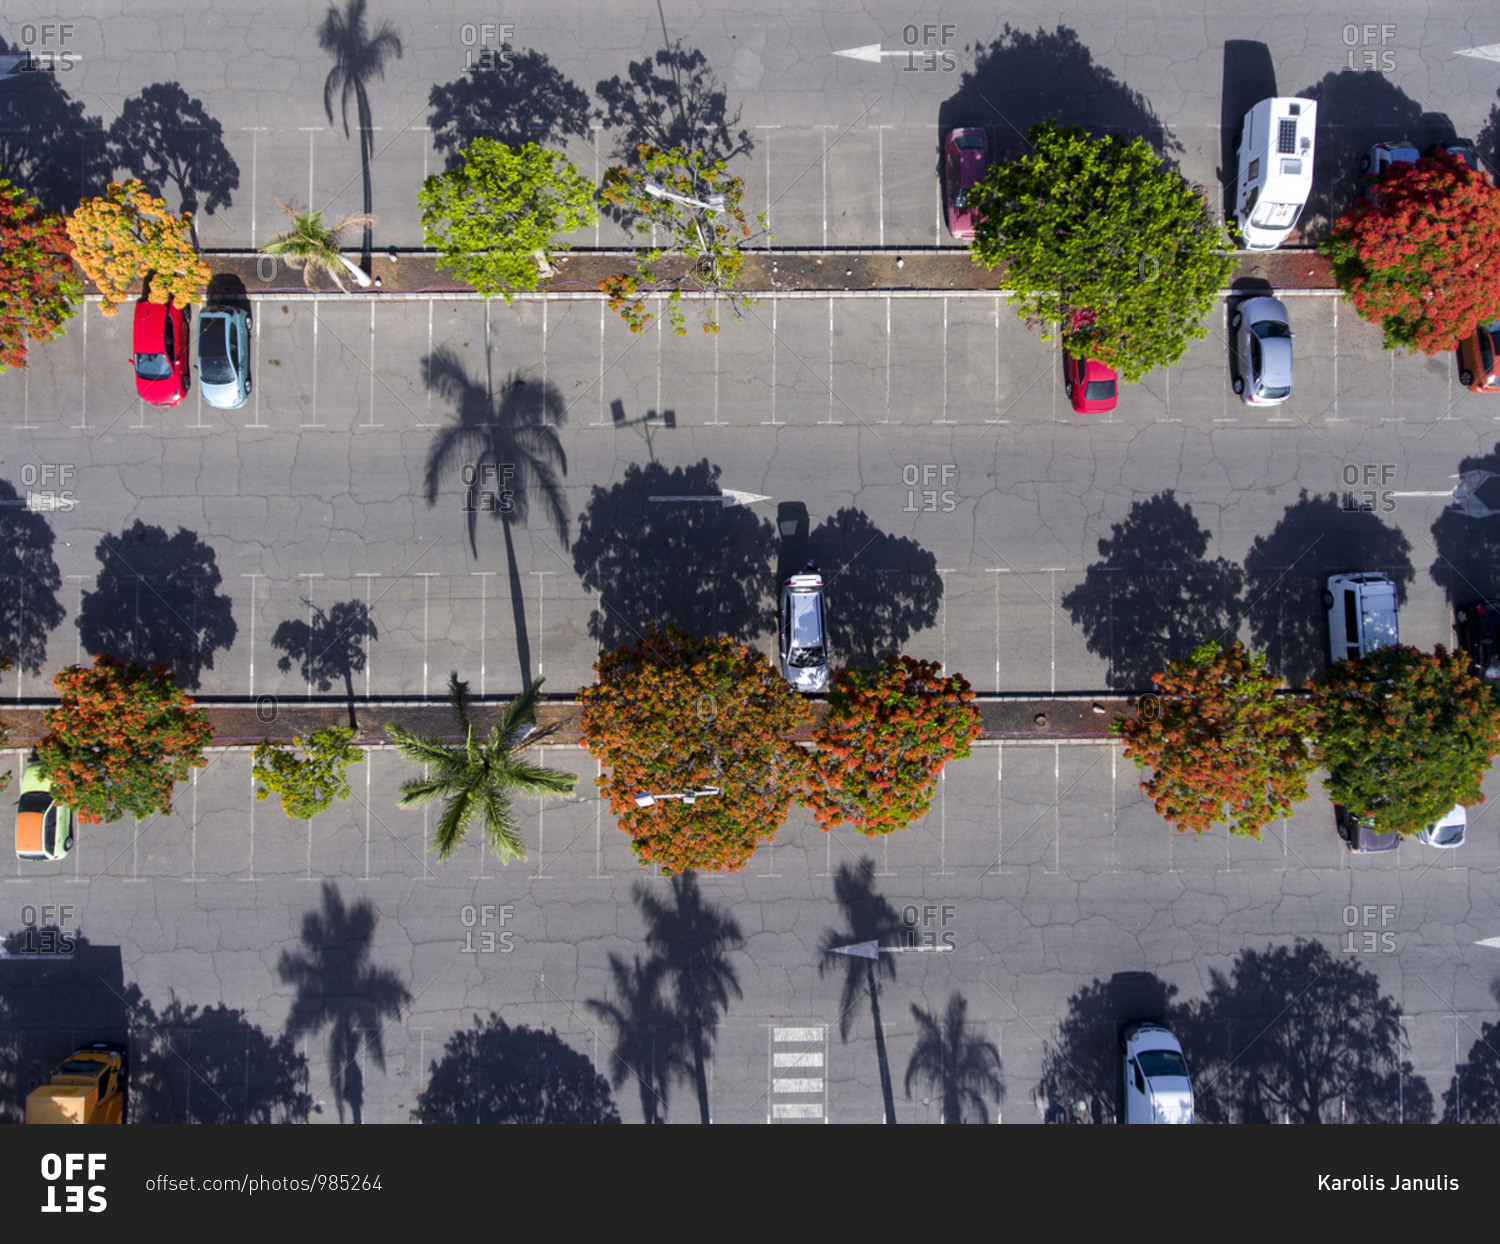 Cars in a parking lot viewed from above